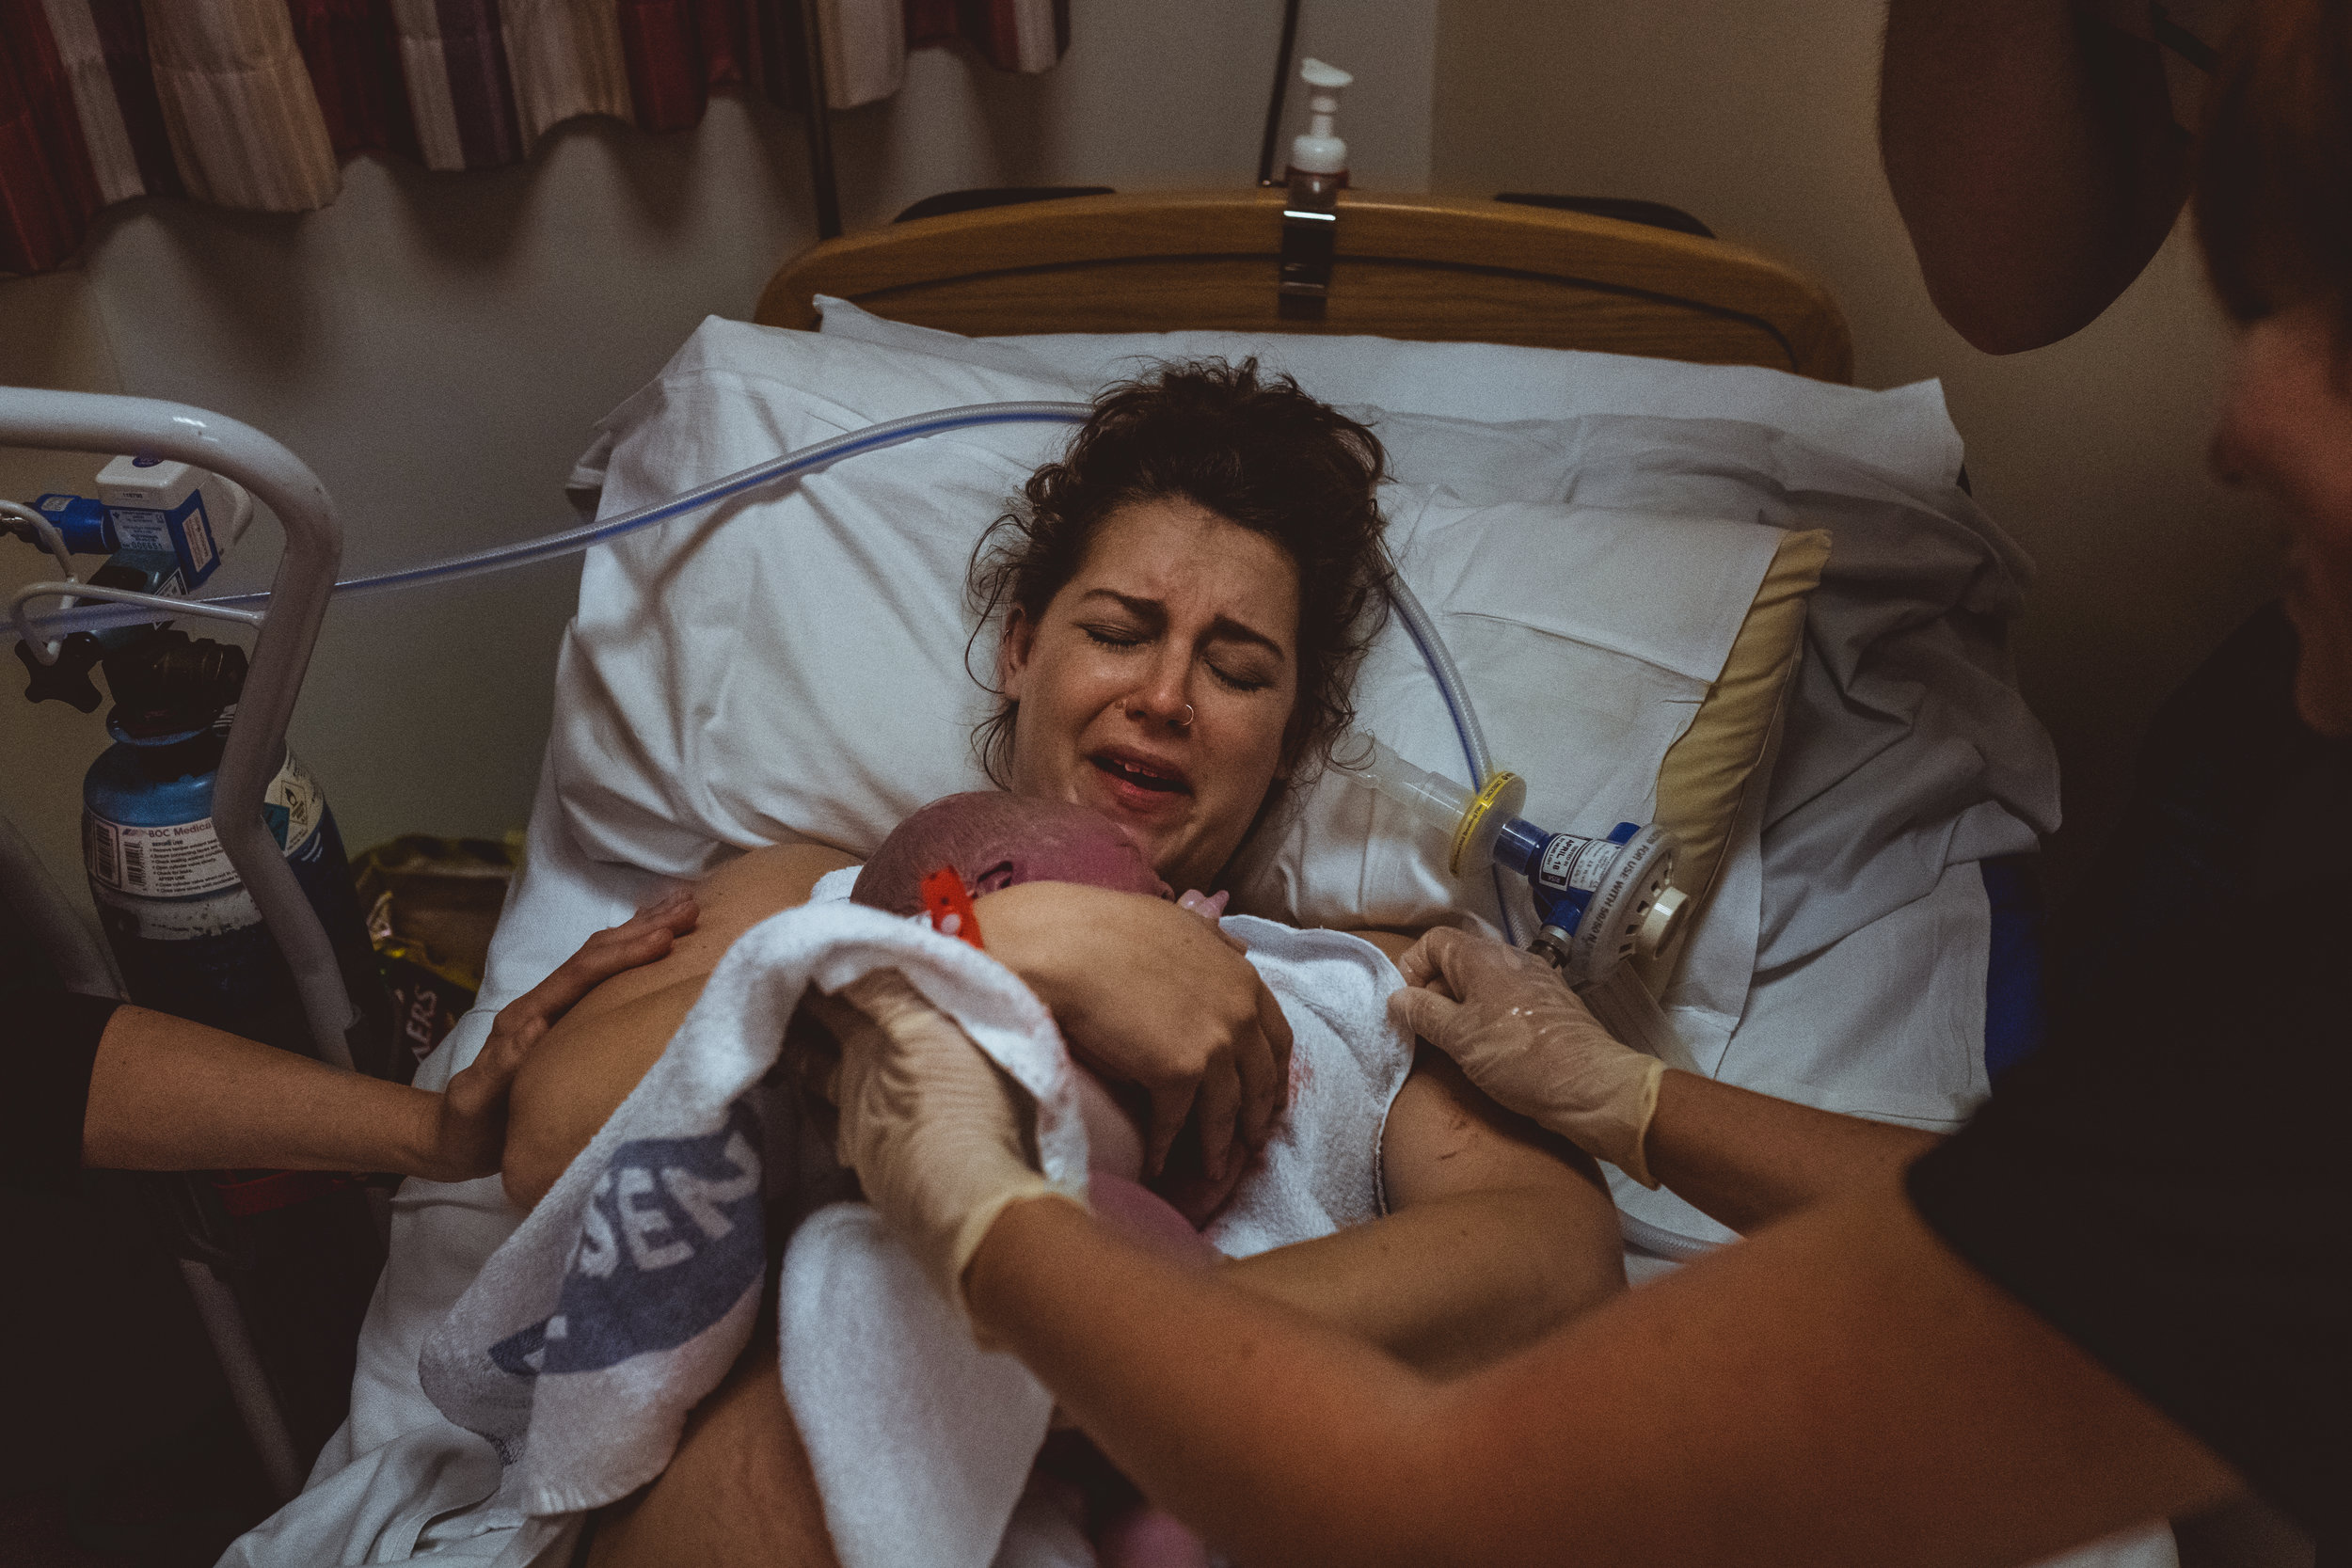 A mother greets her fresh baby with joy after the birth at Royal Derby Hospital, Derbyshire